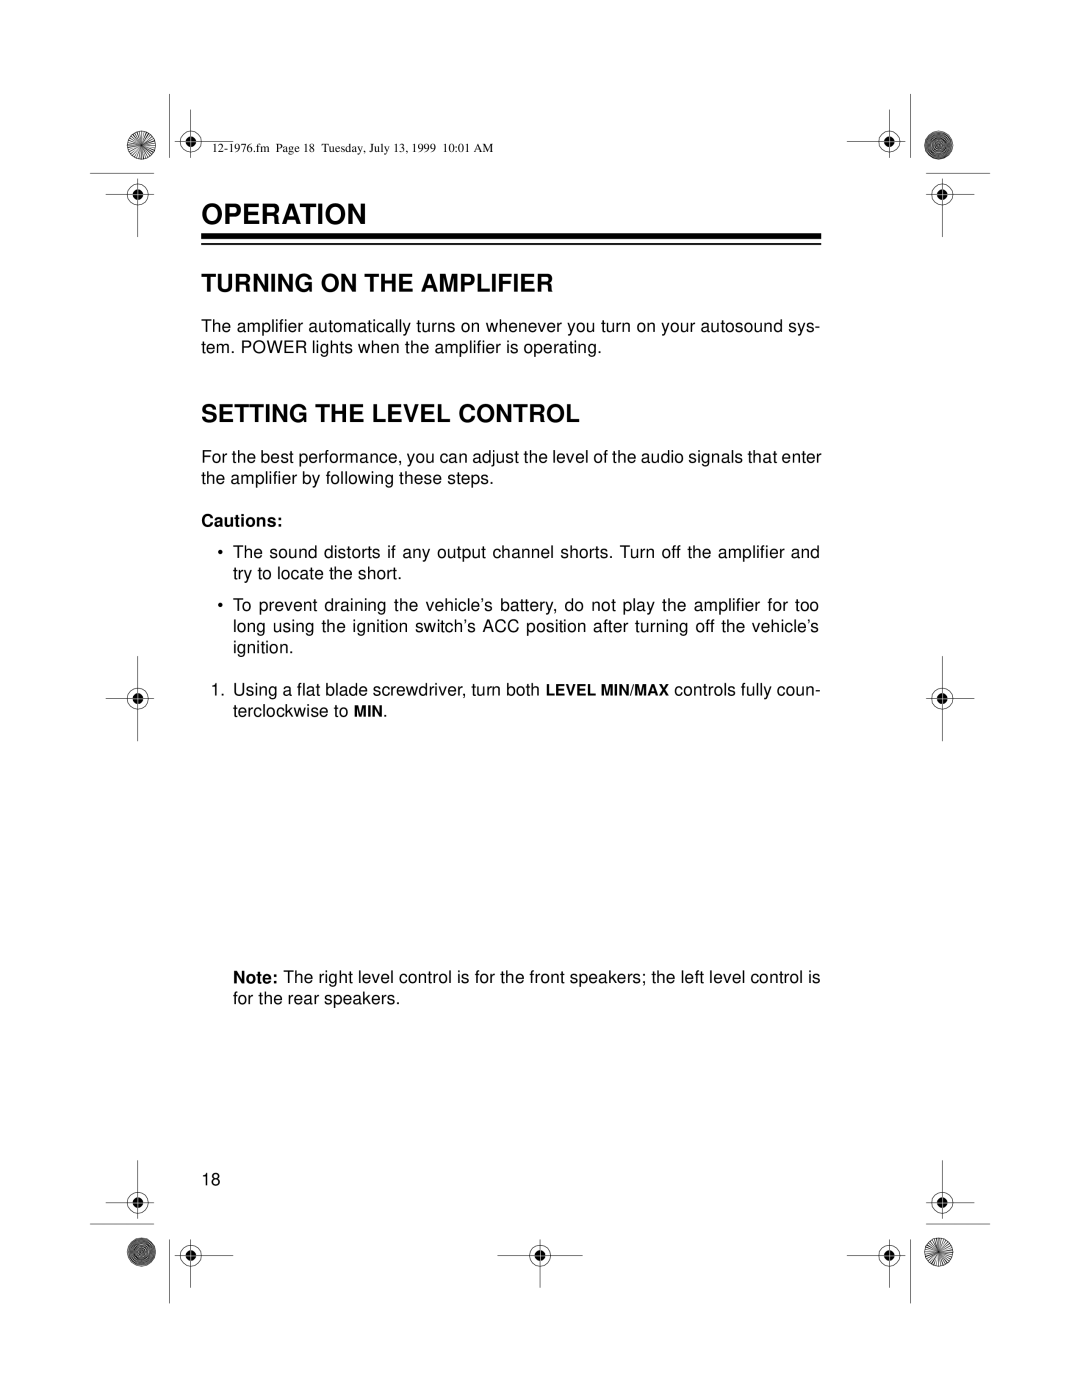 Radio Shack Trunk Mount owner manual Operation, Turning On The Amplifier, Setting The Level Control, Cautions 